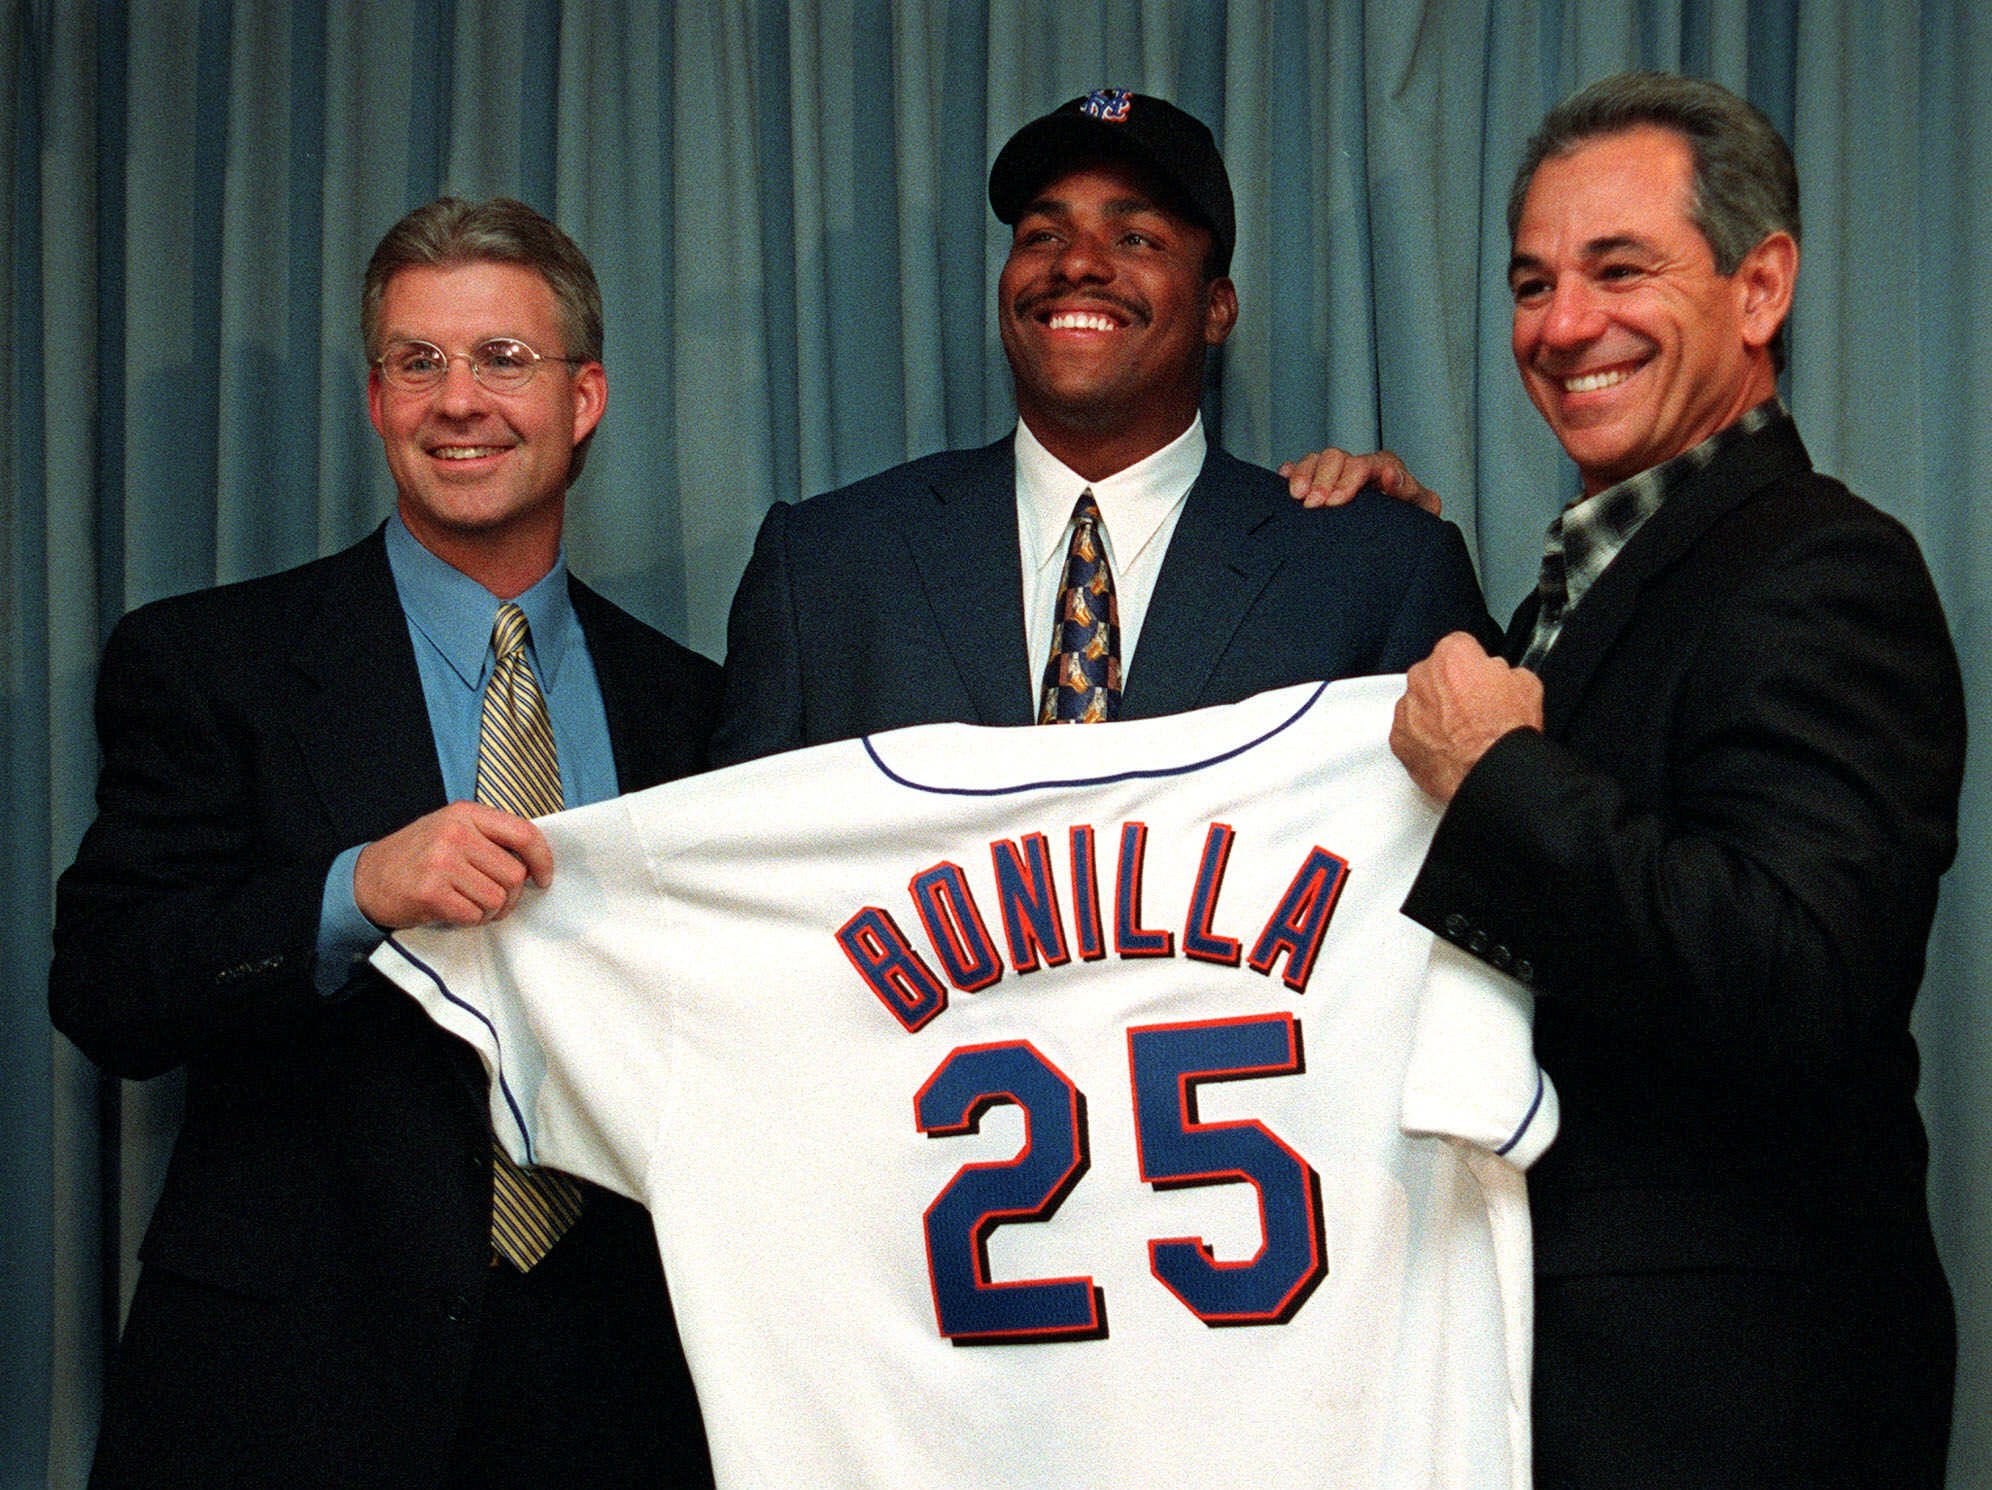 Happy Bobby Bonilla Day to all who celebrate 💰 @vincesince91 #mets #